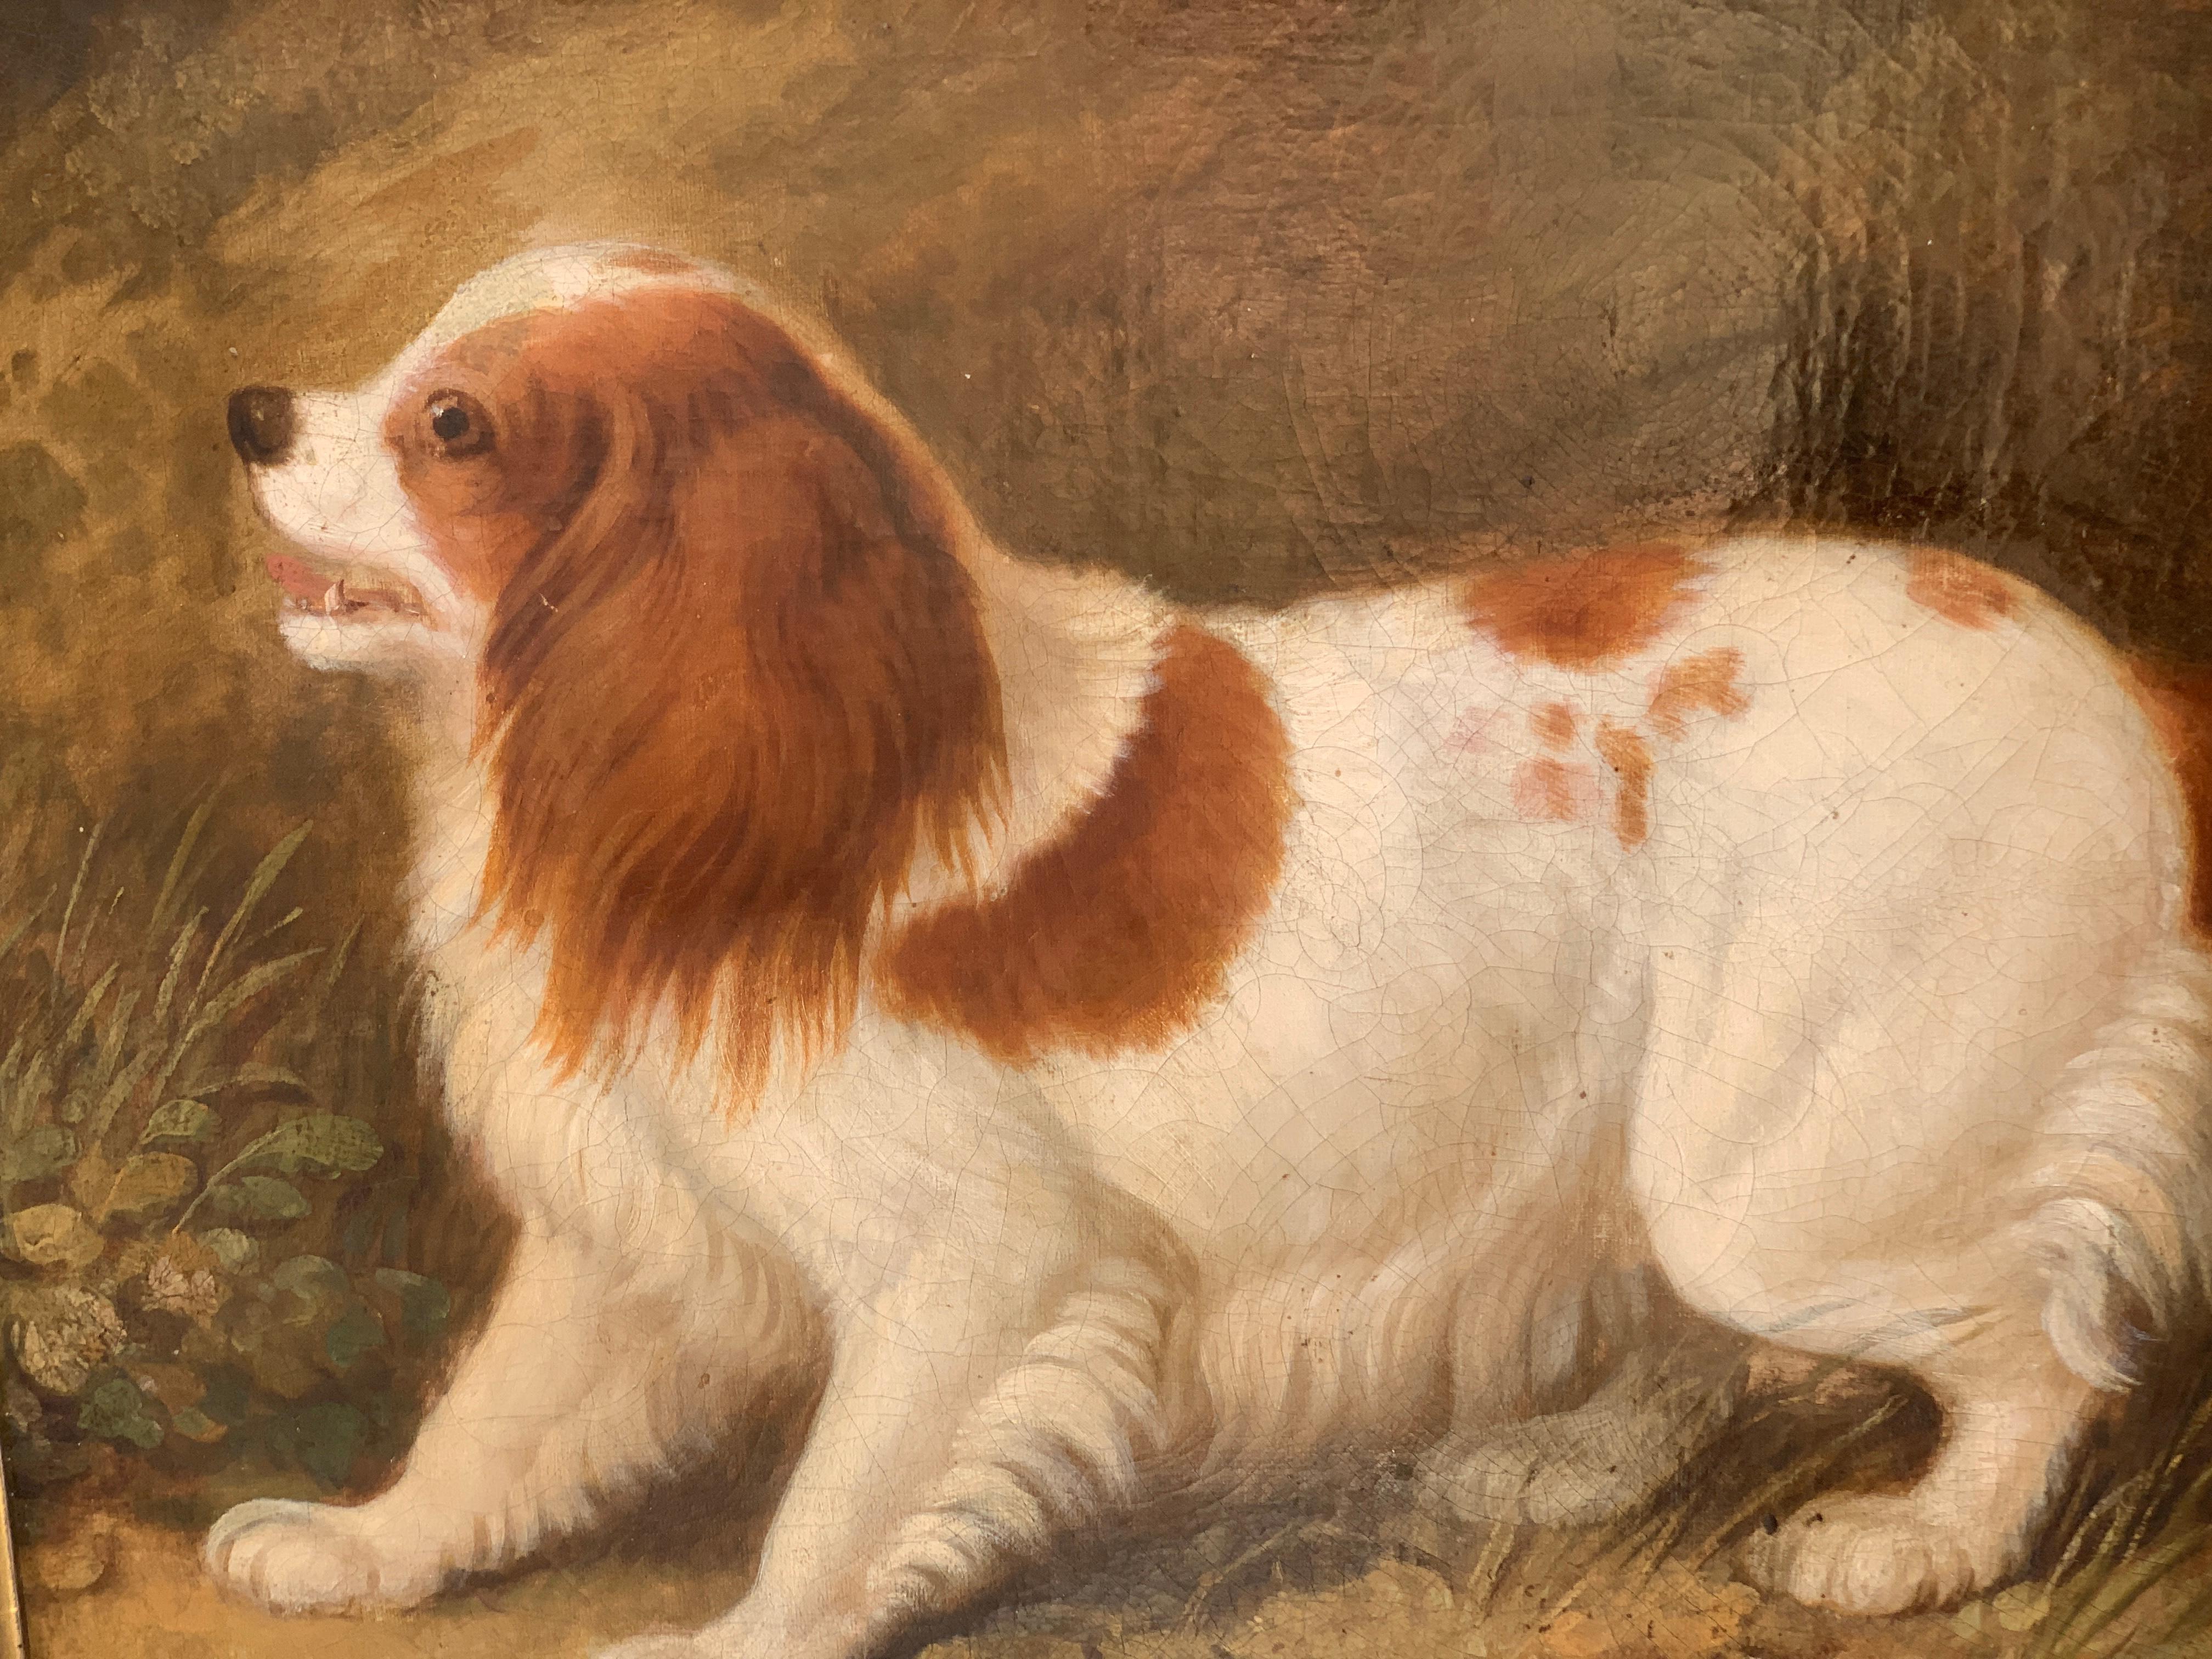 Early Victorian English Folk art portrait of a Spaniel dog or puppy - Painting by Unknown